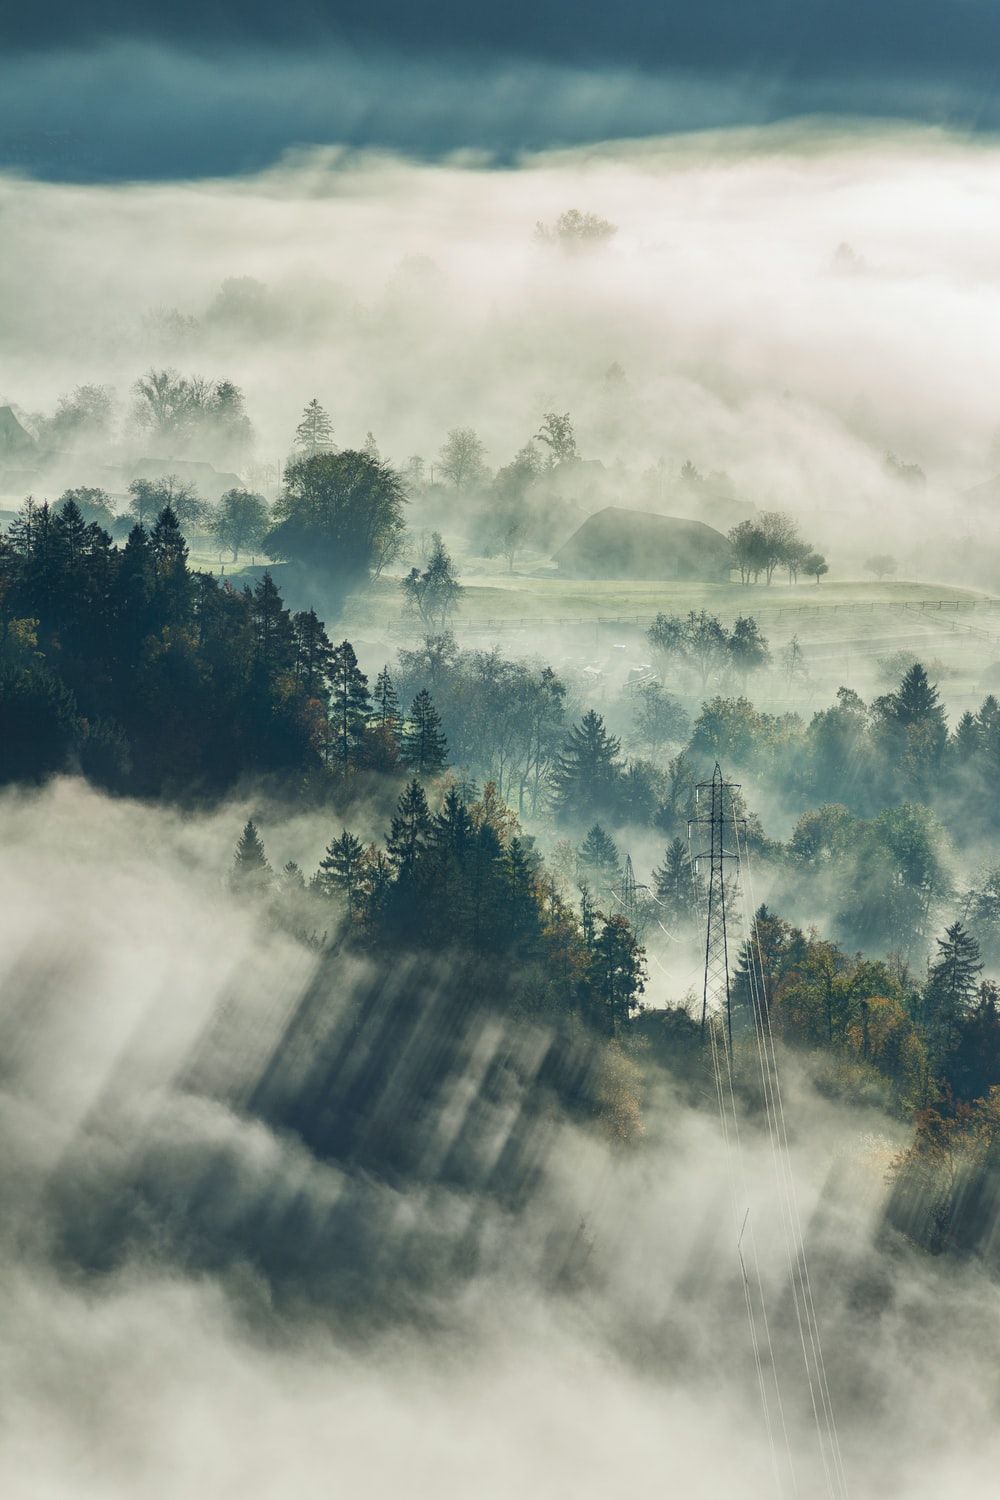 Morning Fog Picture. Download Free Image